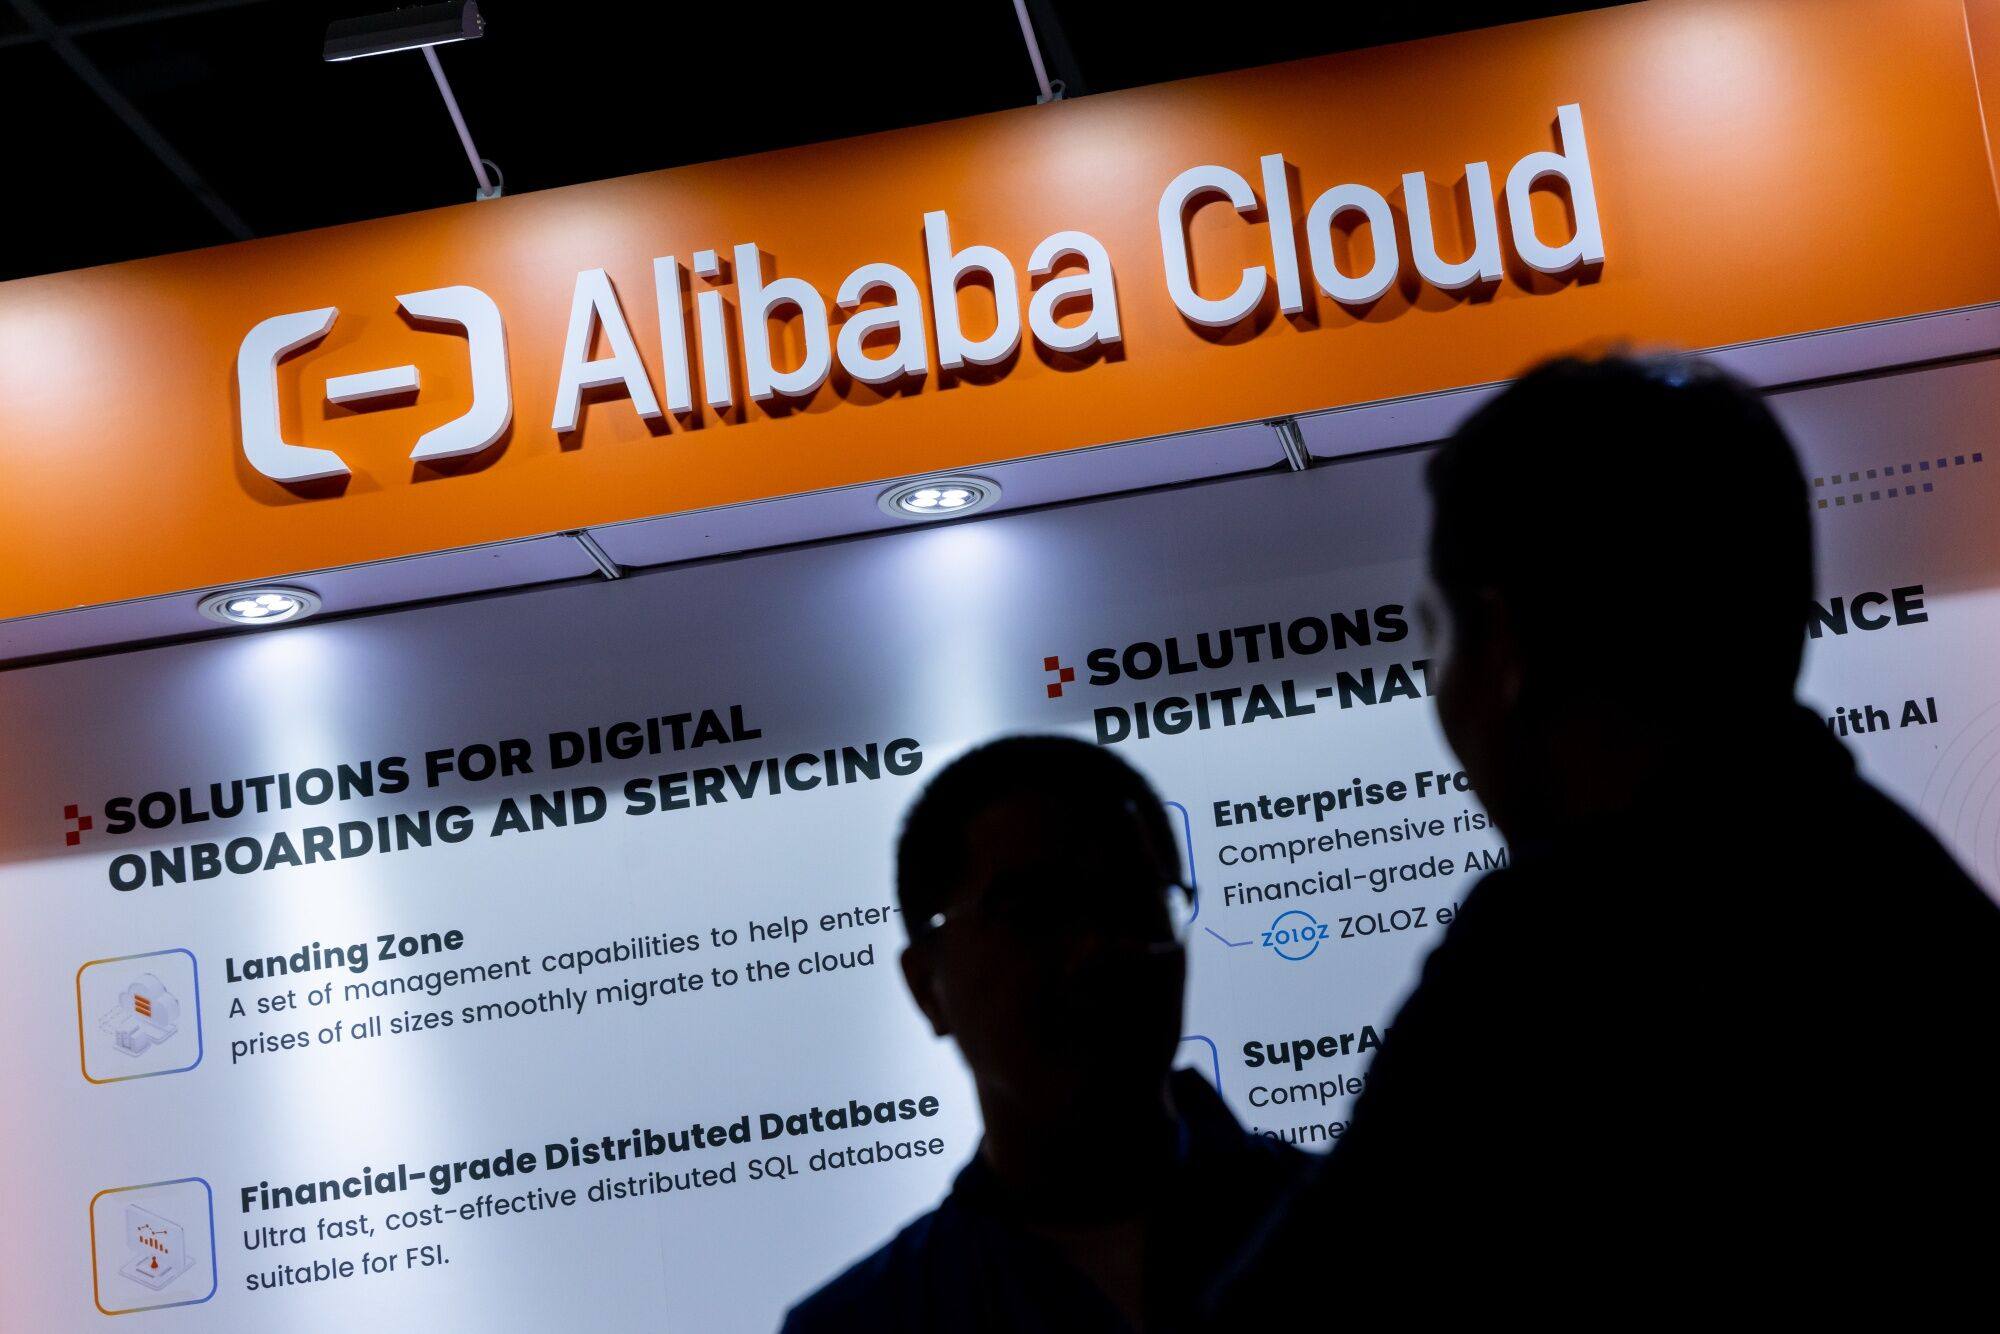 Alibaba Cloud service failure hits Taobao in second outage in a year – South China Morning Post